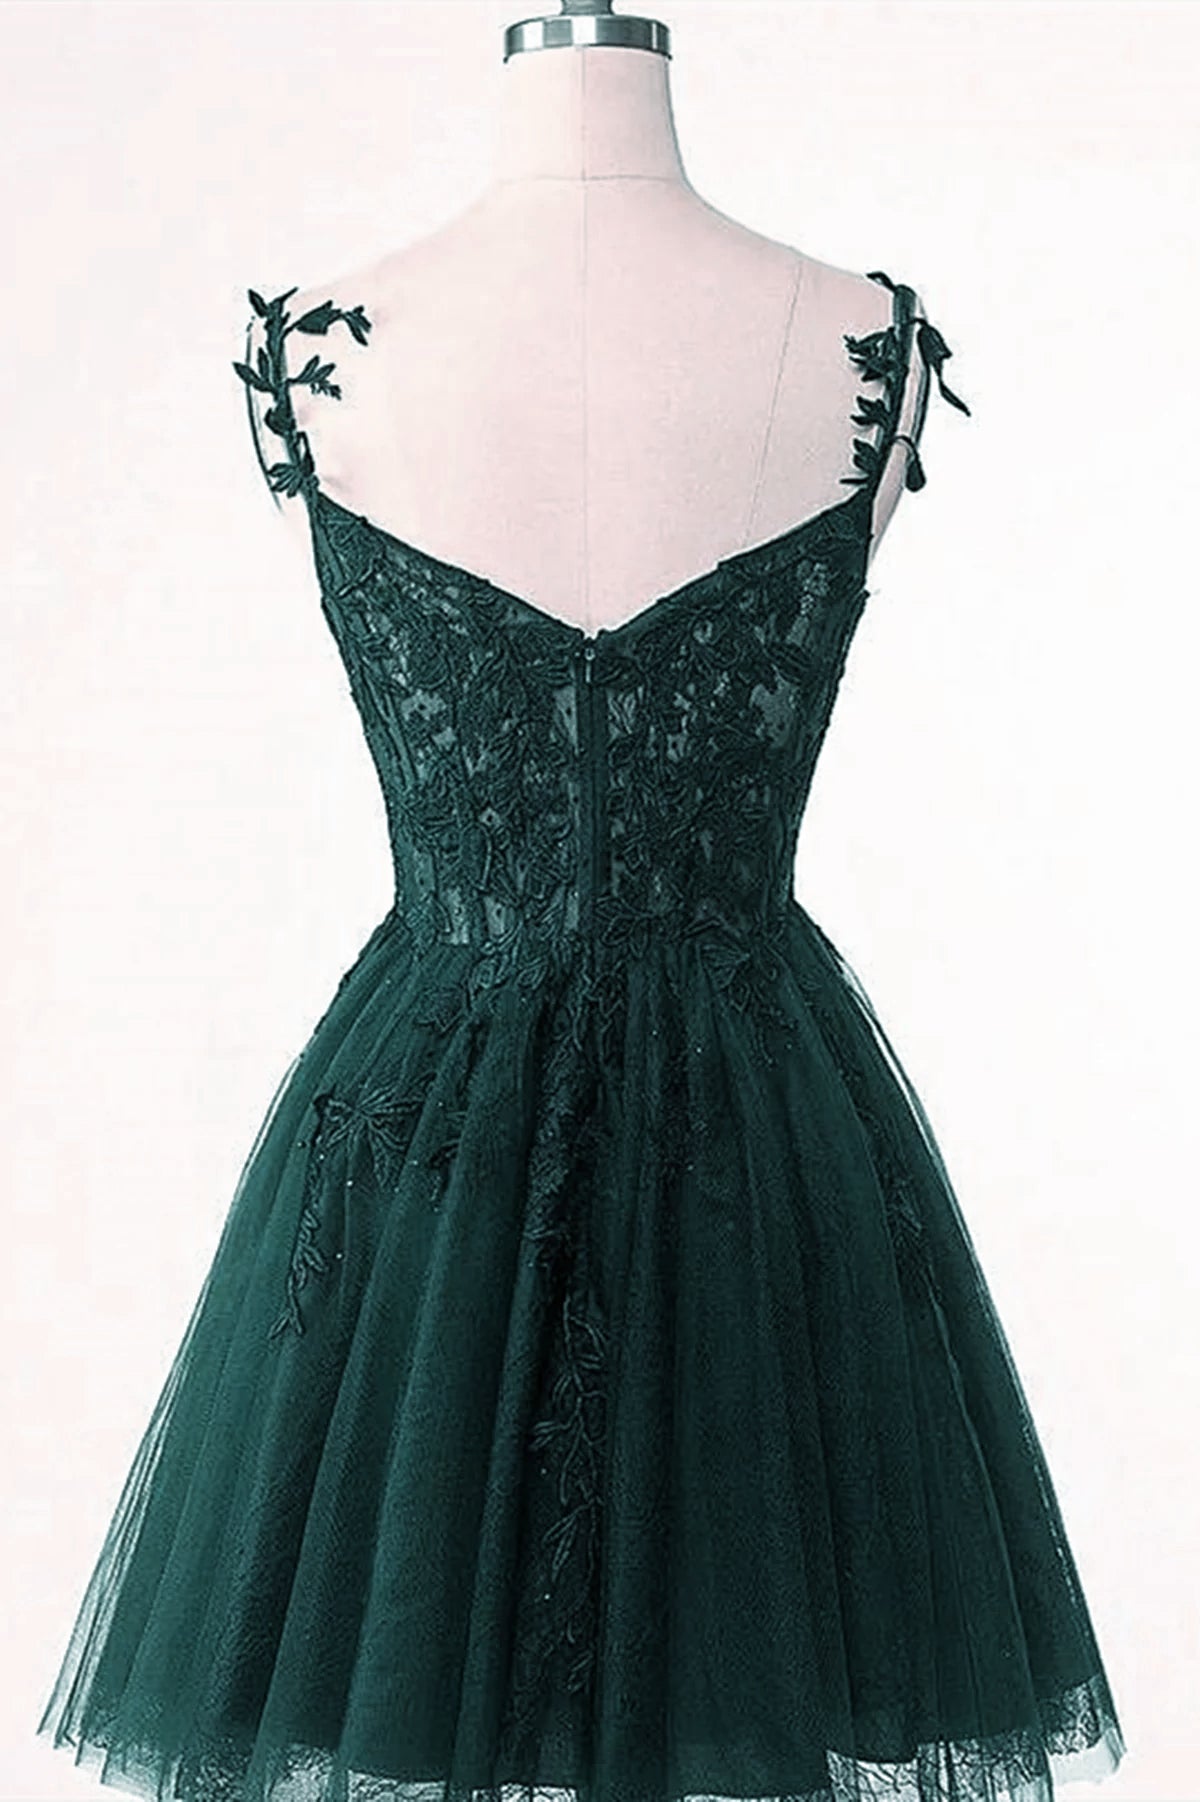 Prom Dresses For 11 Year Olds, Cute Green Tulle Short Straps Sweetheart Homecoming Dress, Green Short Prom Dress